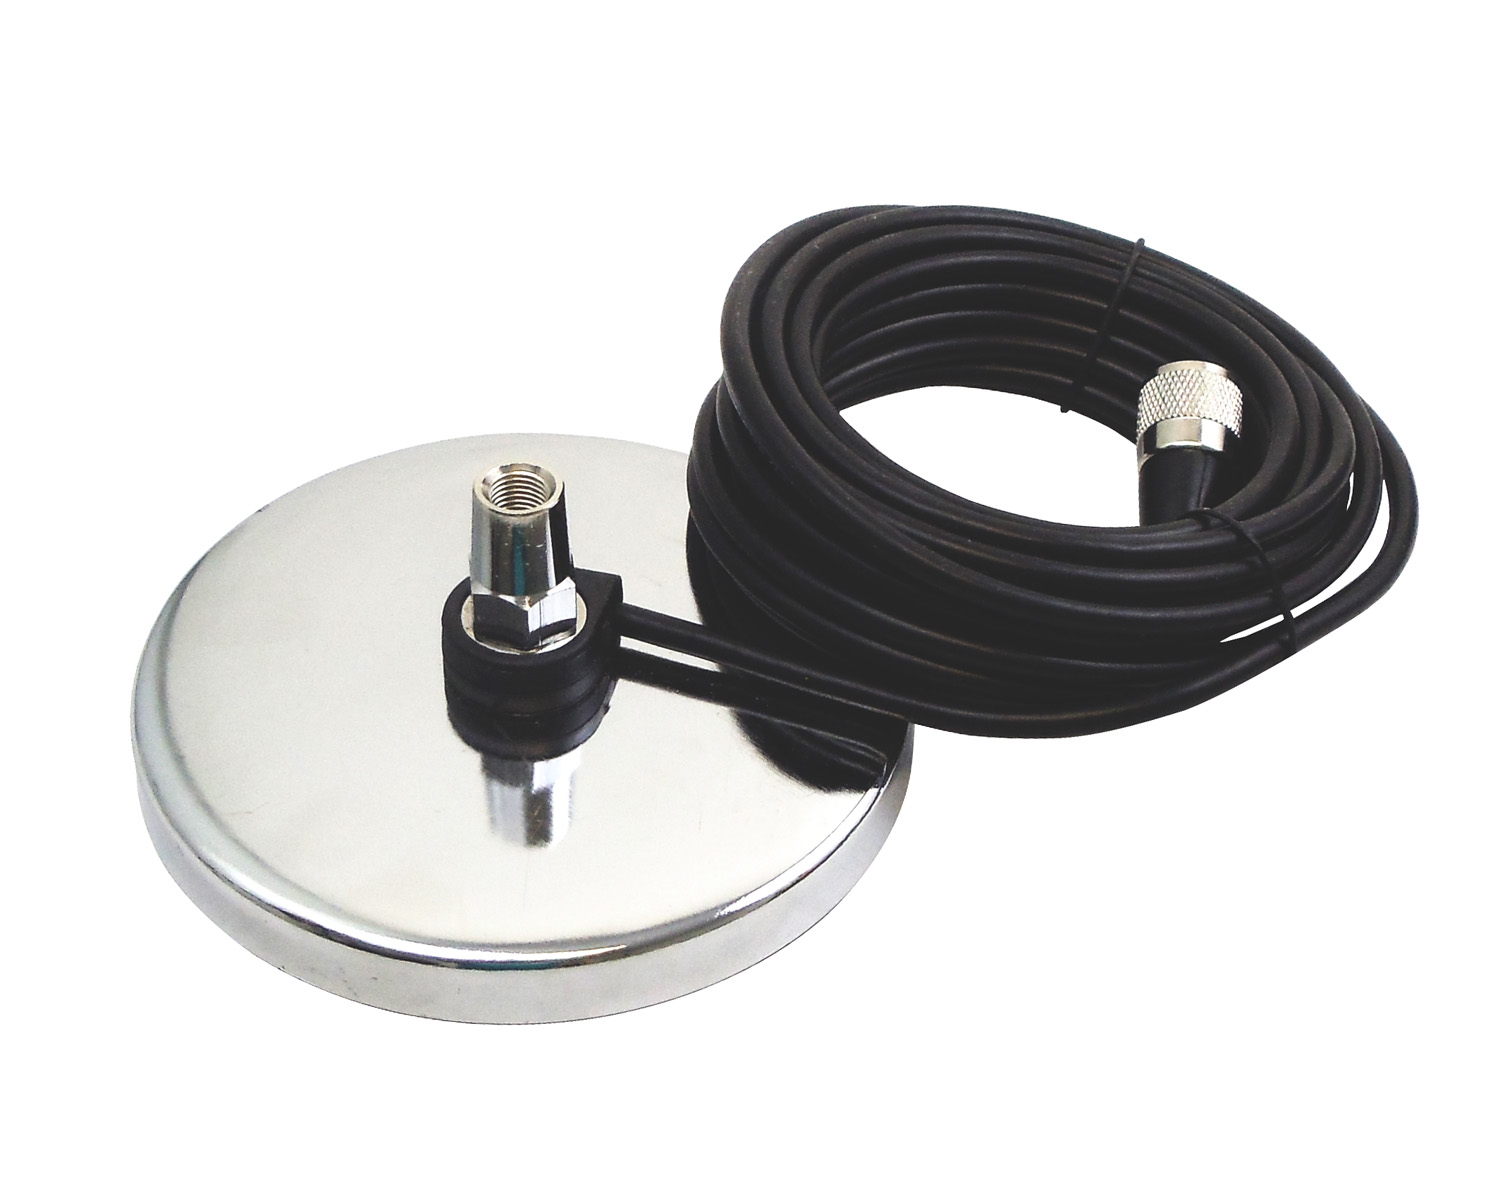 Procomm - 3" Chrome Plated Heavy Duty Magnet Mount With 12' Coax Cable  & Molded Pl259 Connector